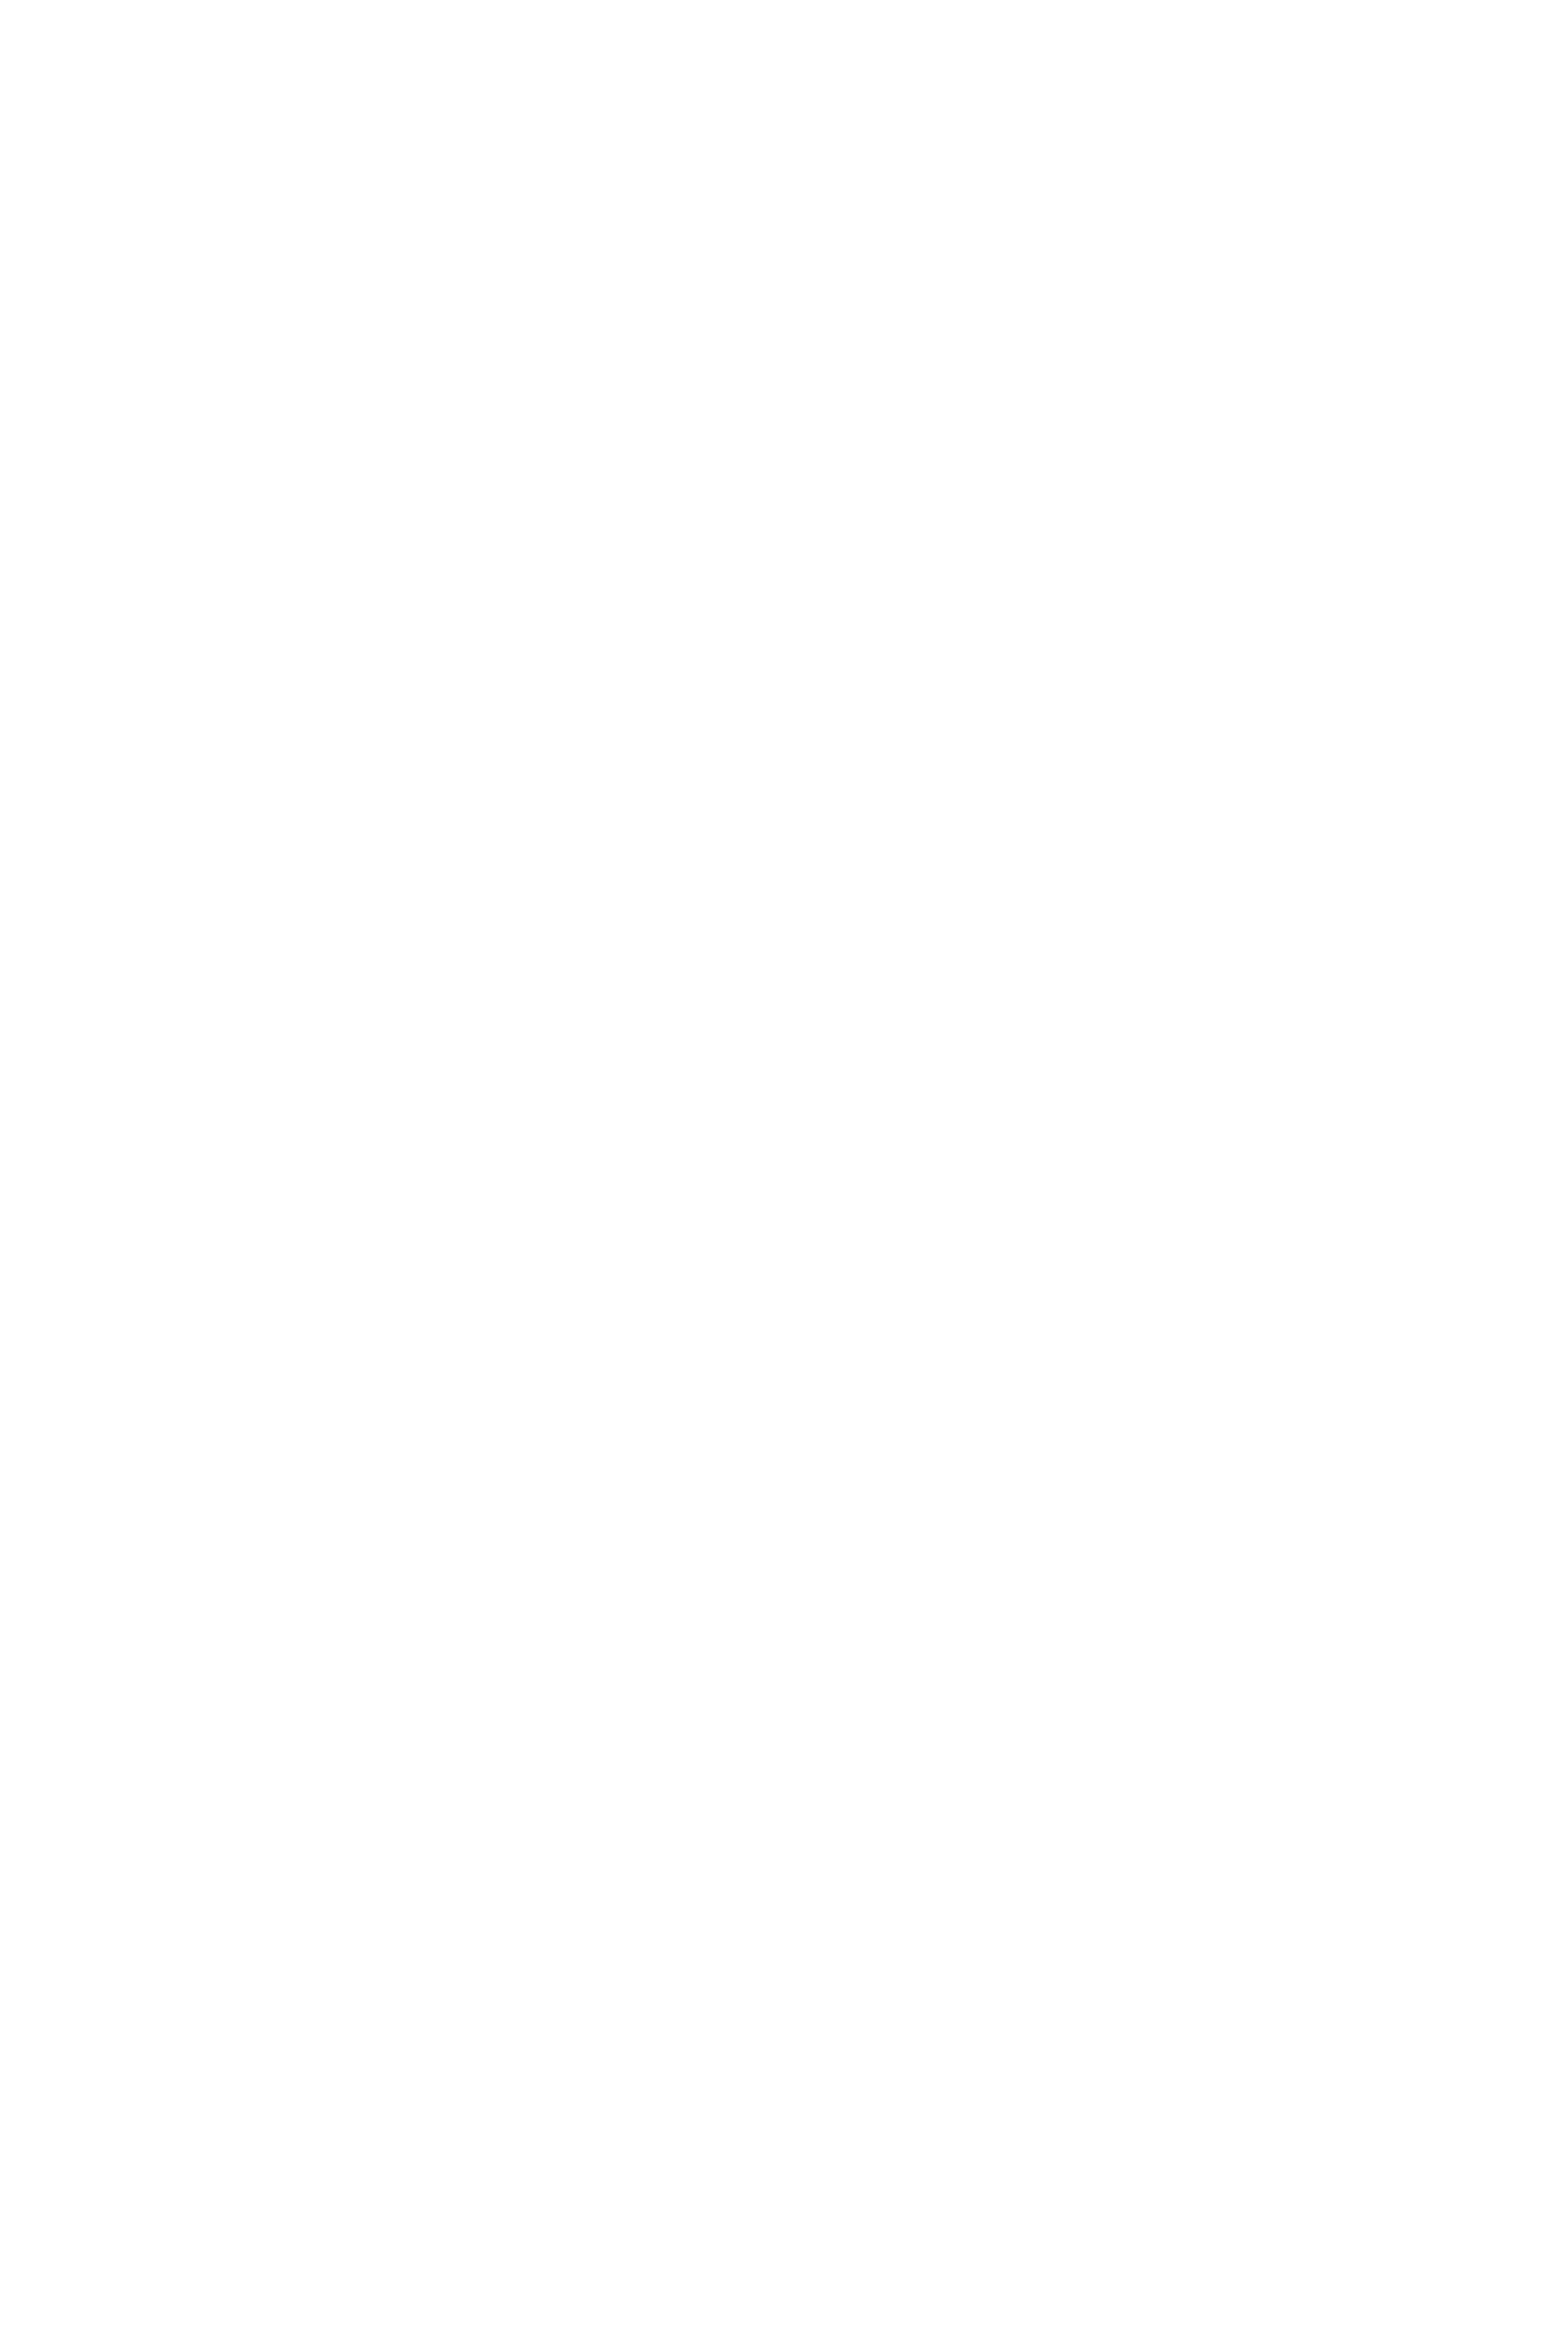 Picture of the Figma logo.